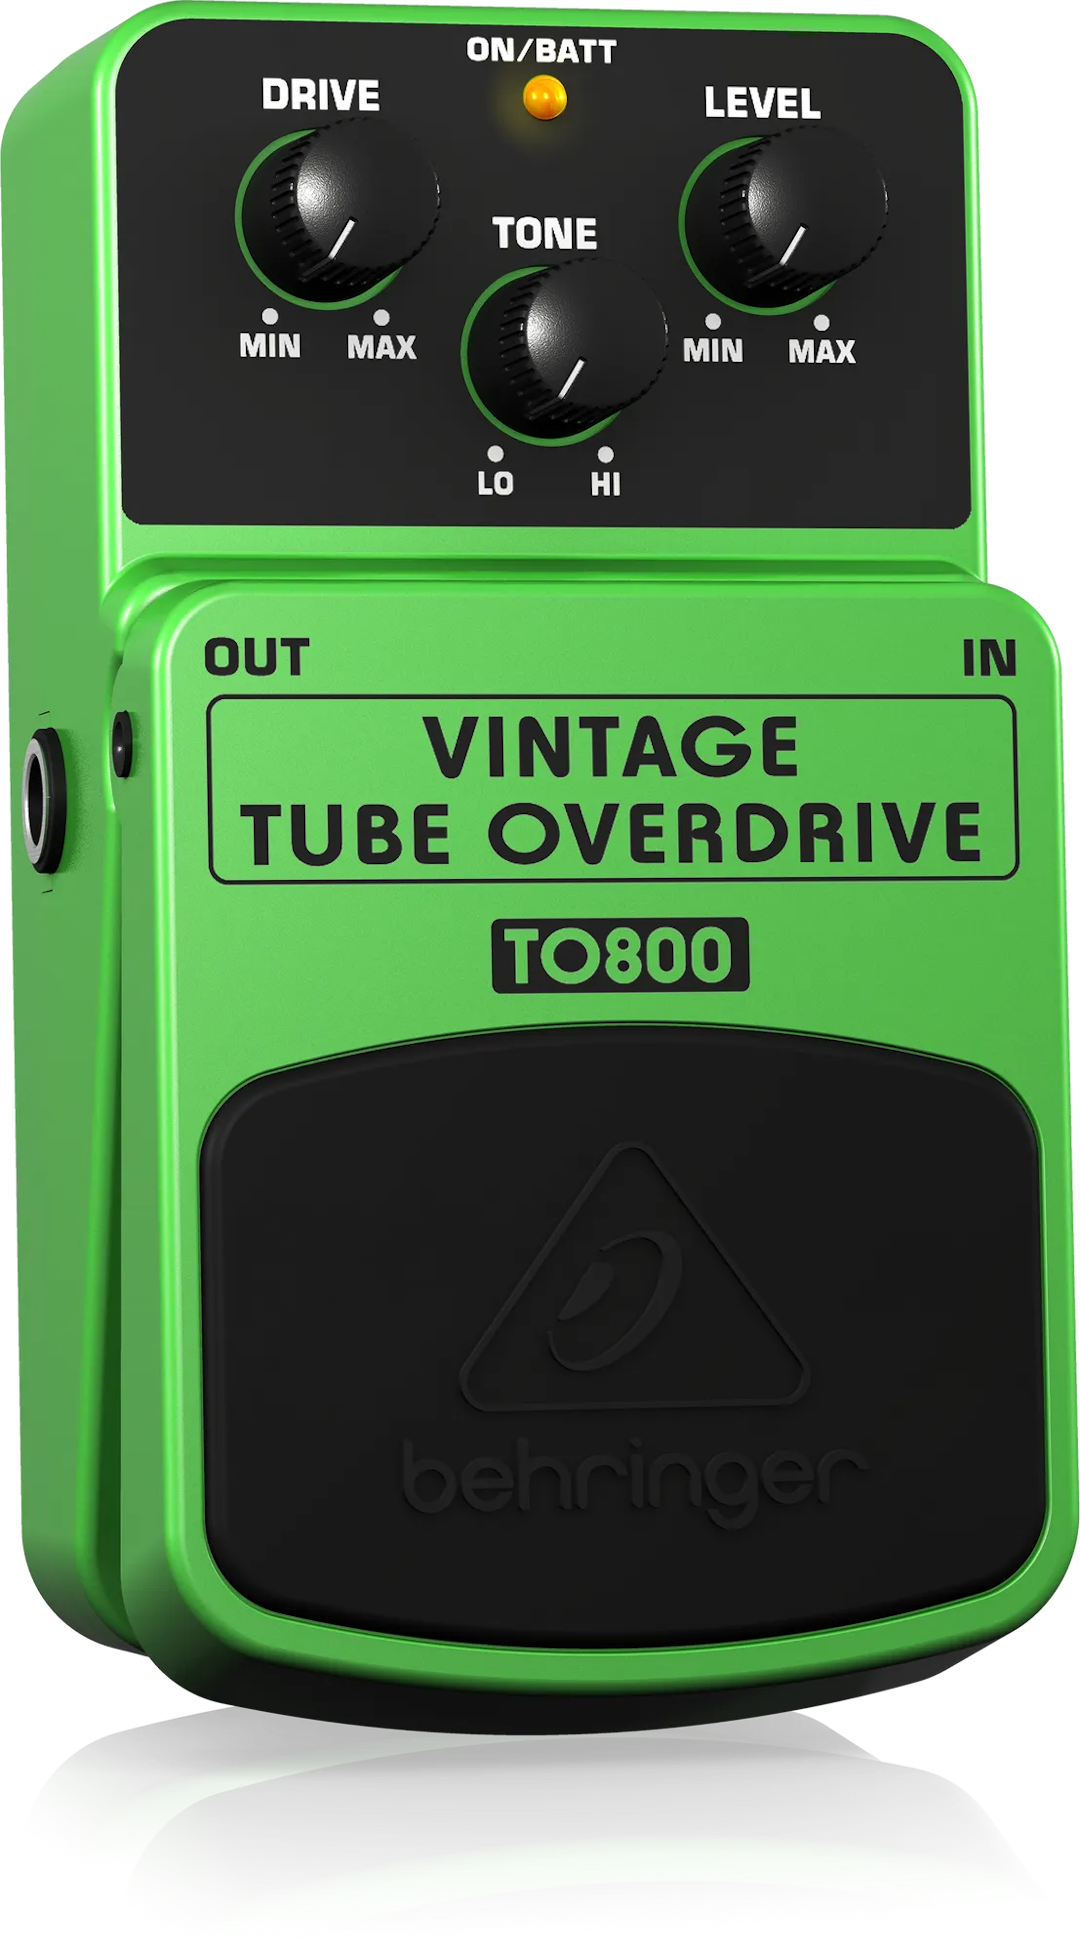 TO800 Vintage Tube Overdrive Guitar Pedal By Behringer